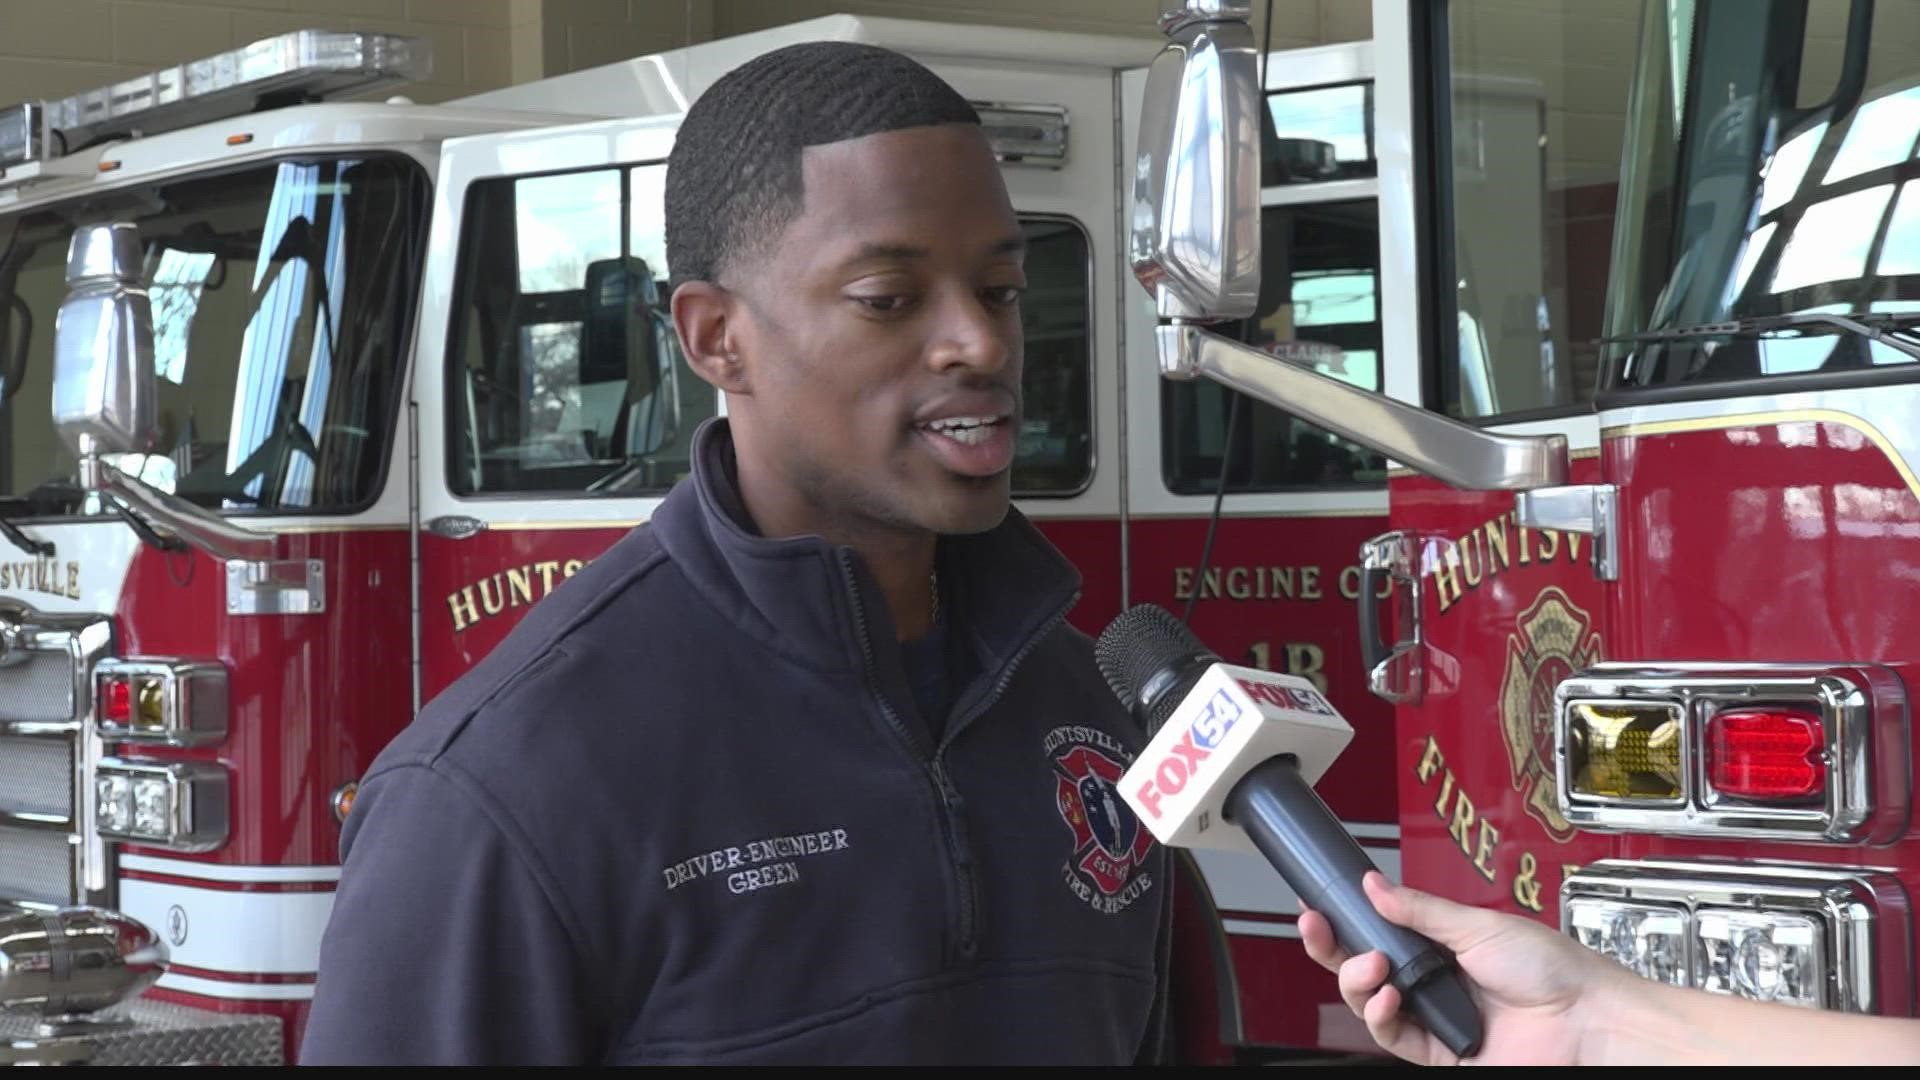 Huntsville Fire & Rescue is seeking highly motivated and caring difference-makers to join its team.